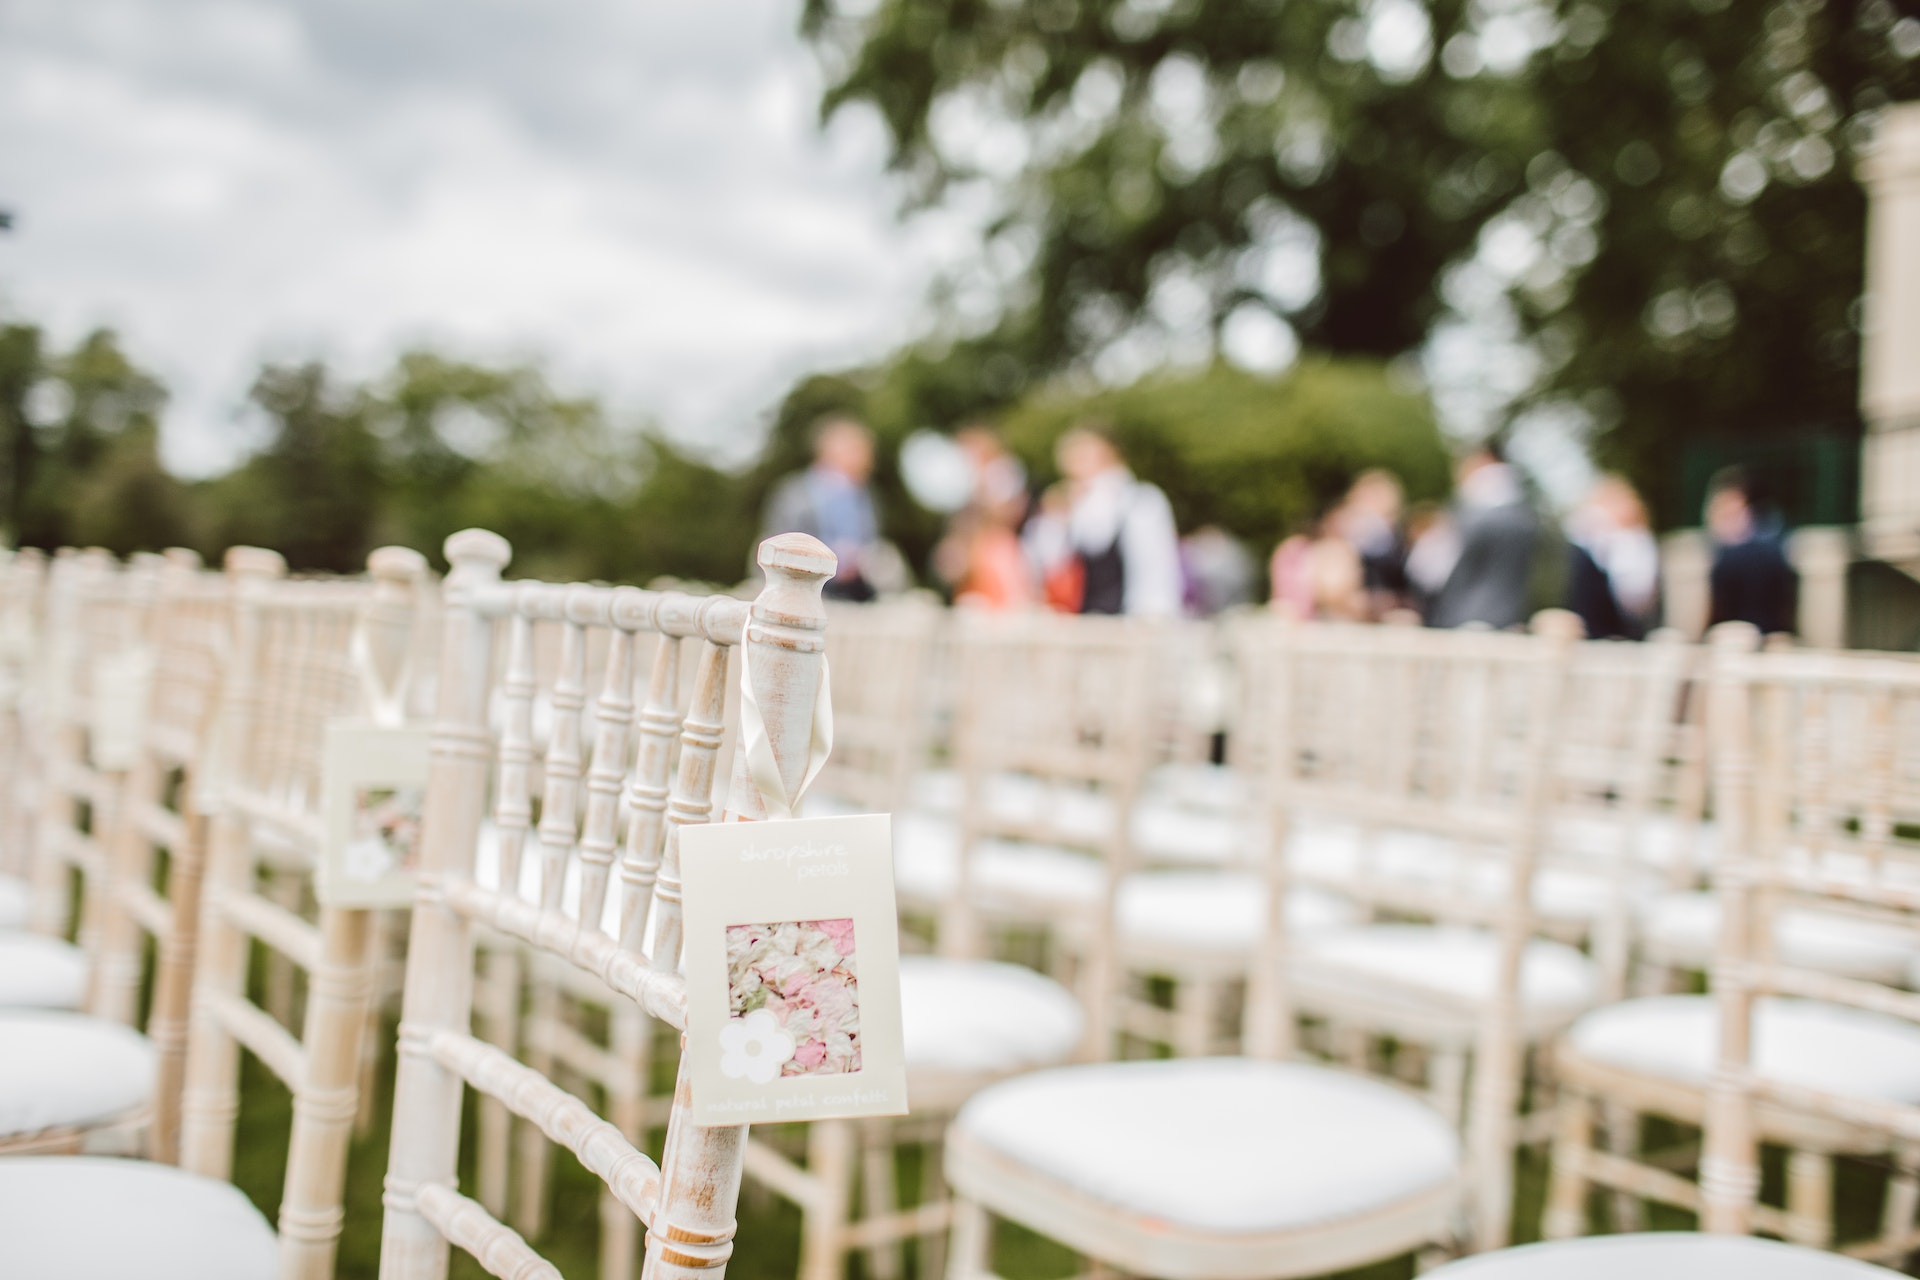 White chairs at wedding ceremony and guests